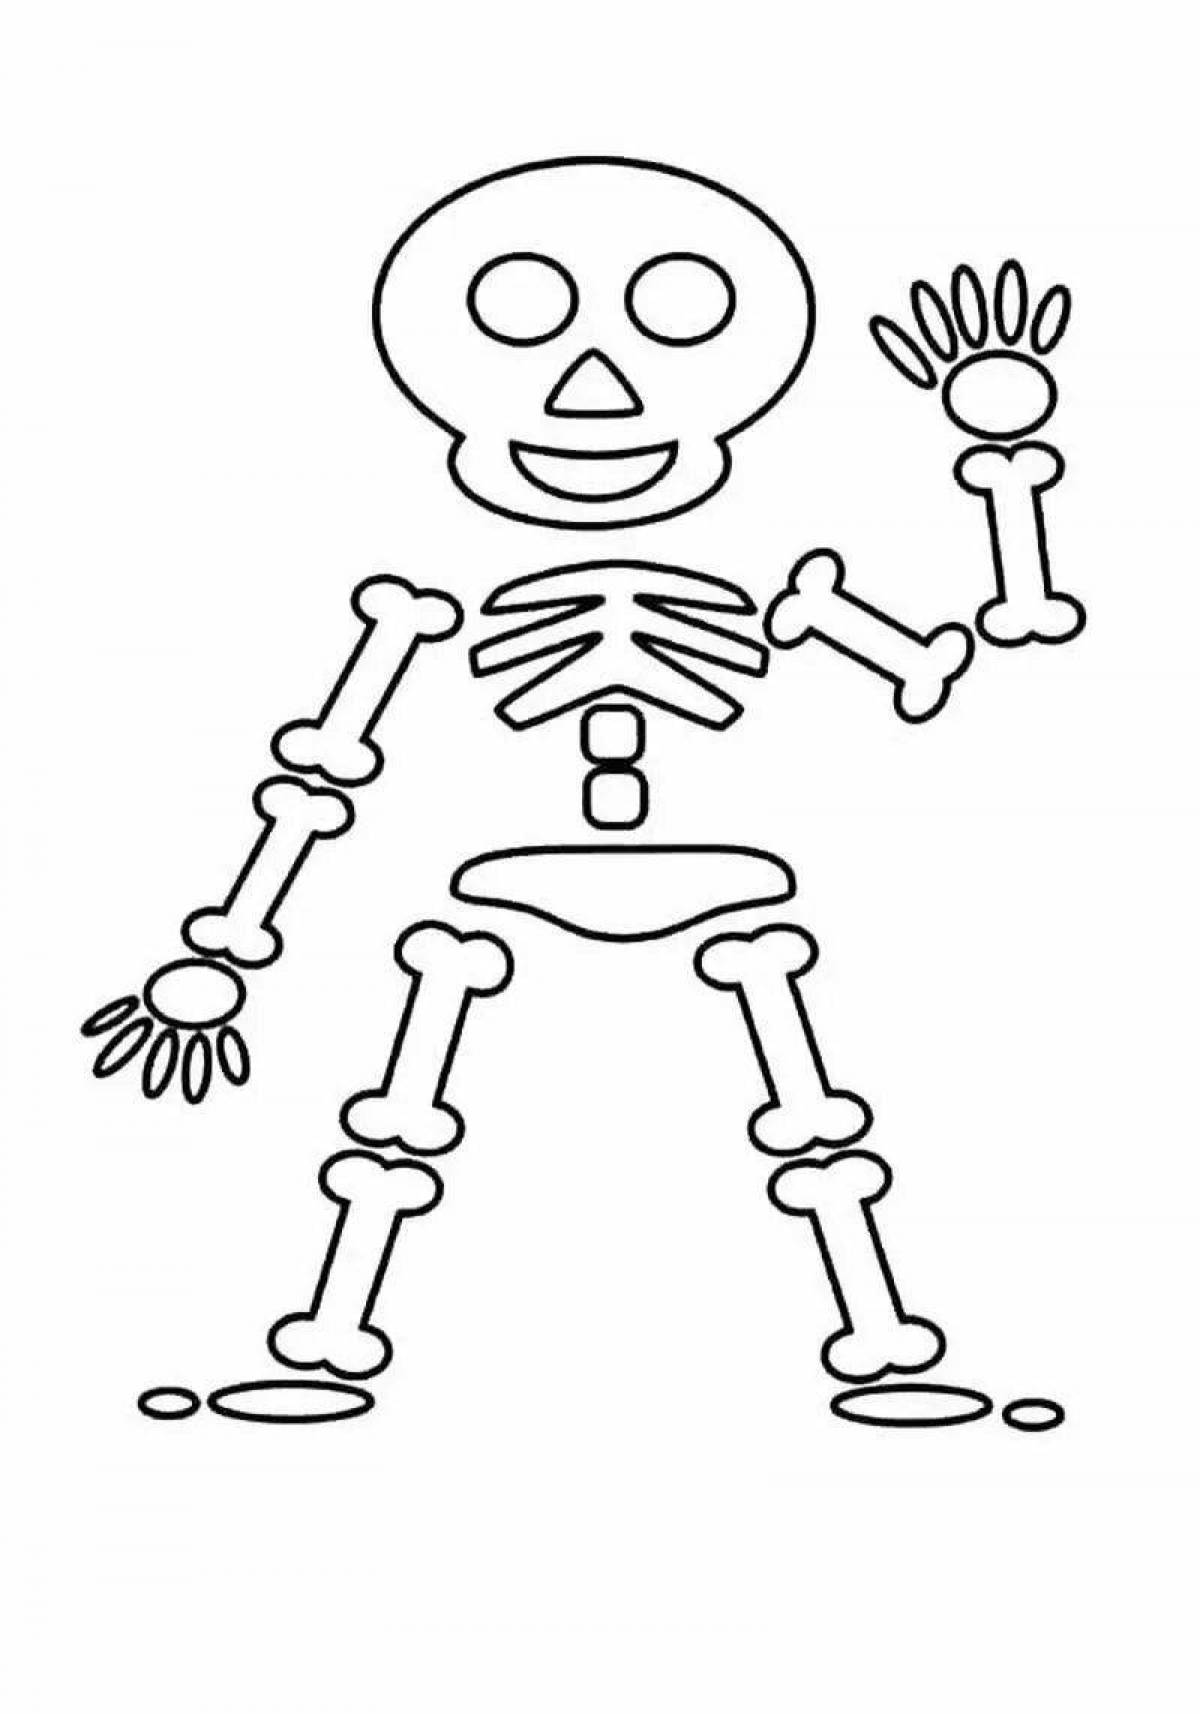 Spooky skeleton coloring page